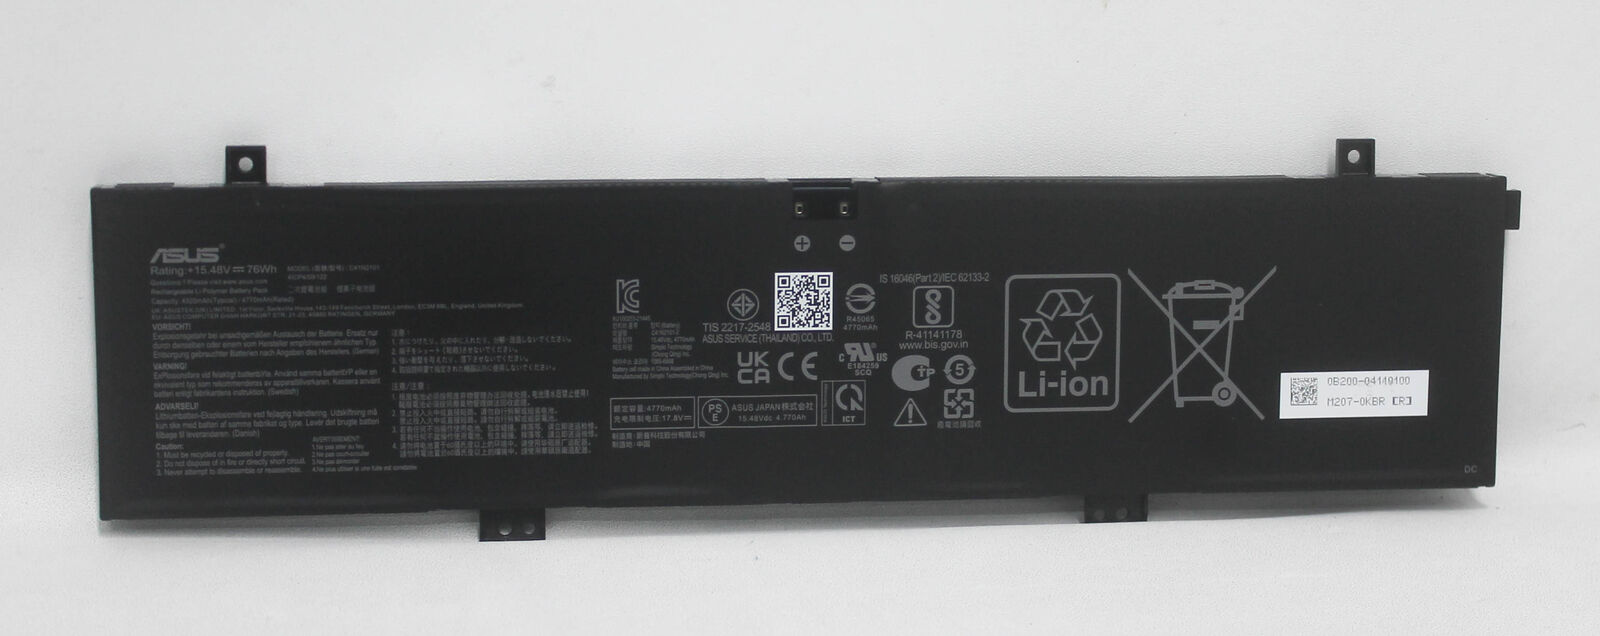 76Wh Asus 0B200-04110100 Battery